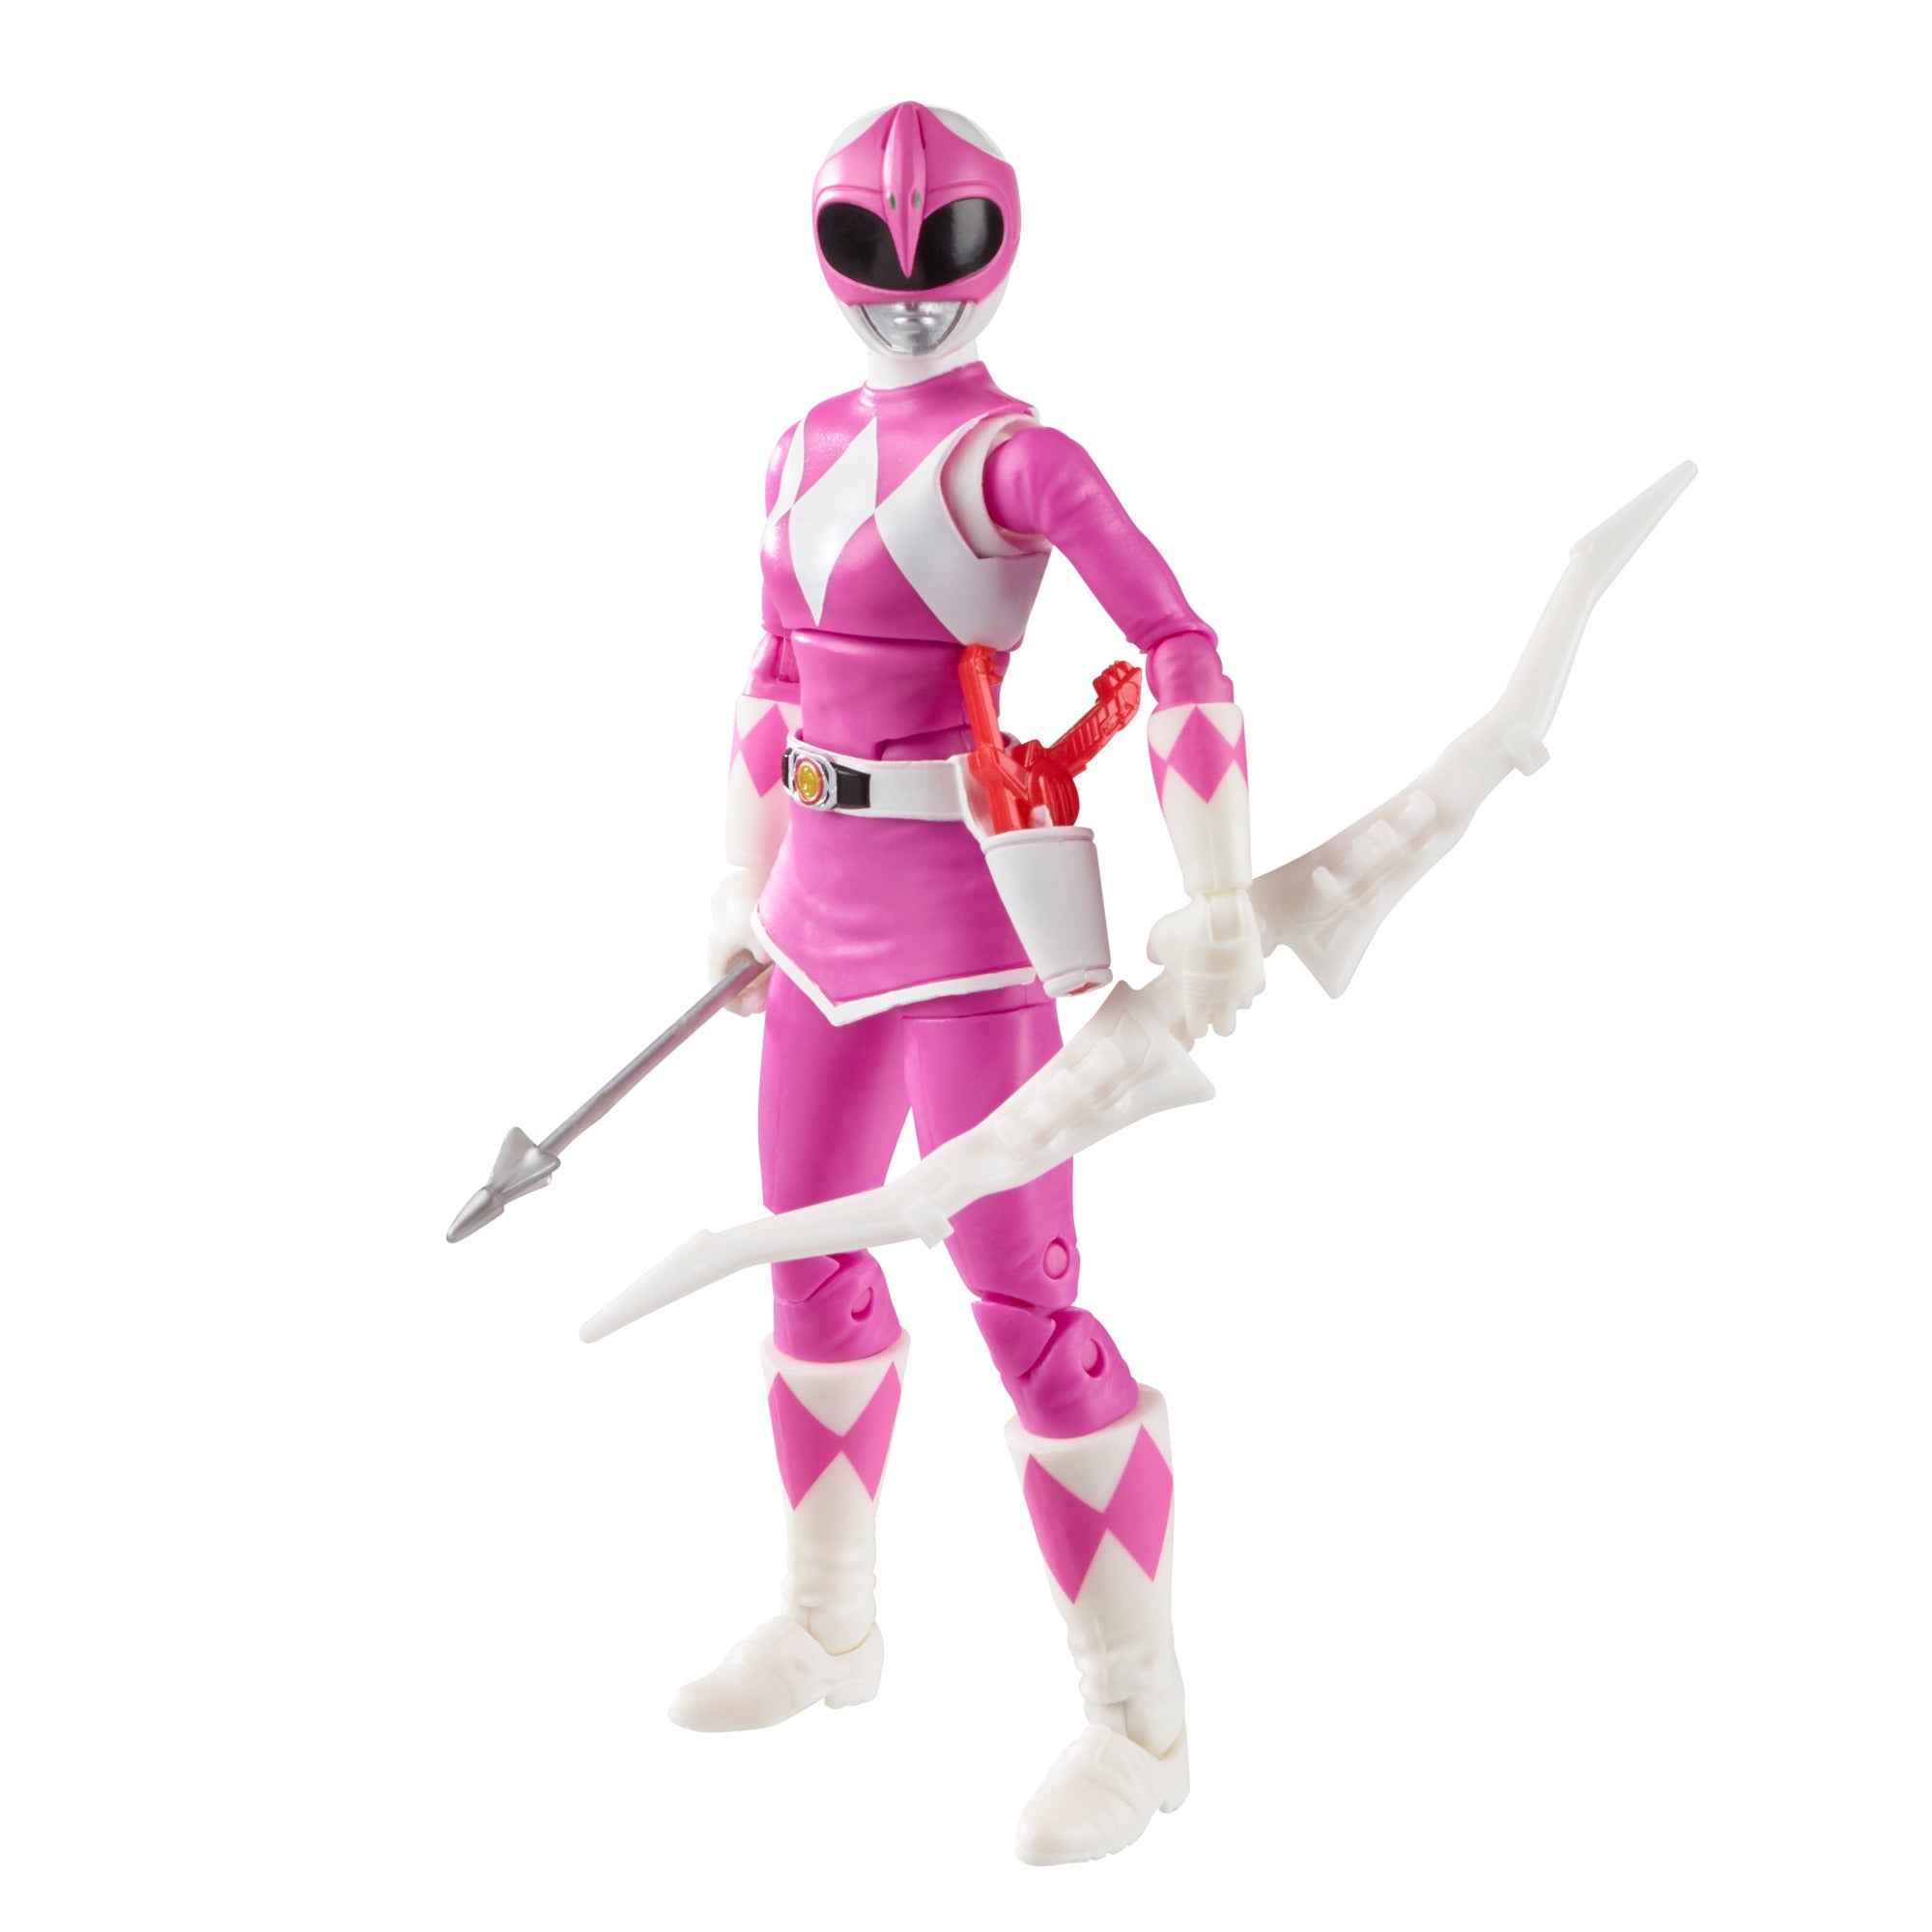 Power Rangers Lightning Collection Mighty Morphin Pink Ranger and Zeo Pink Ranger